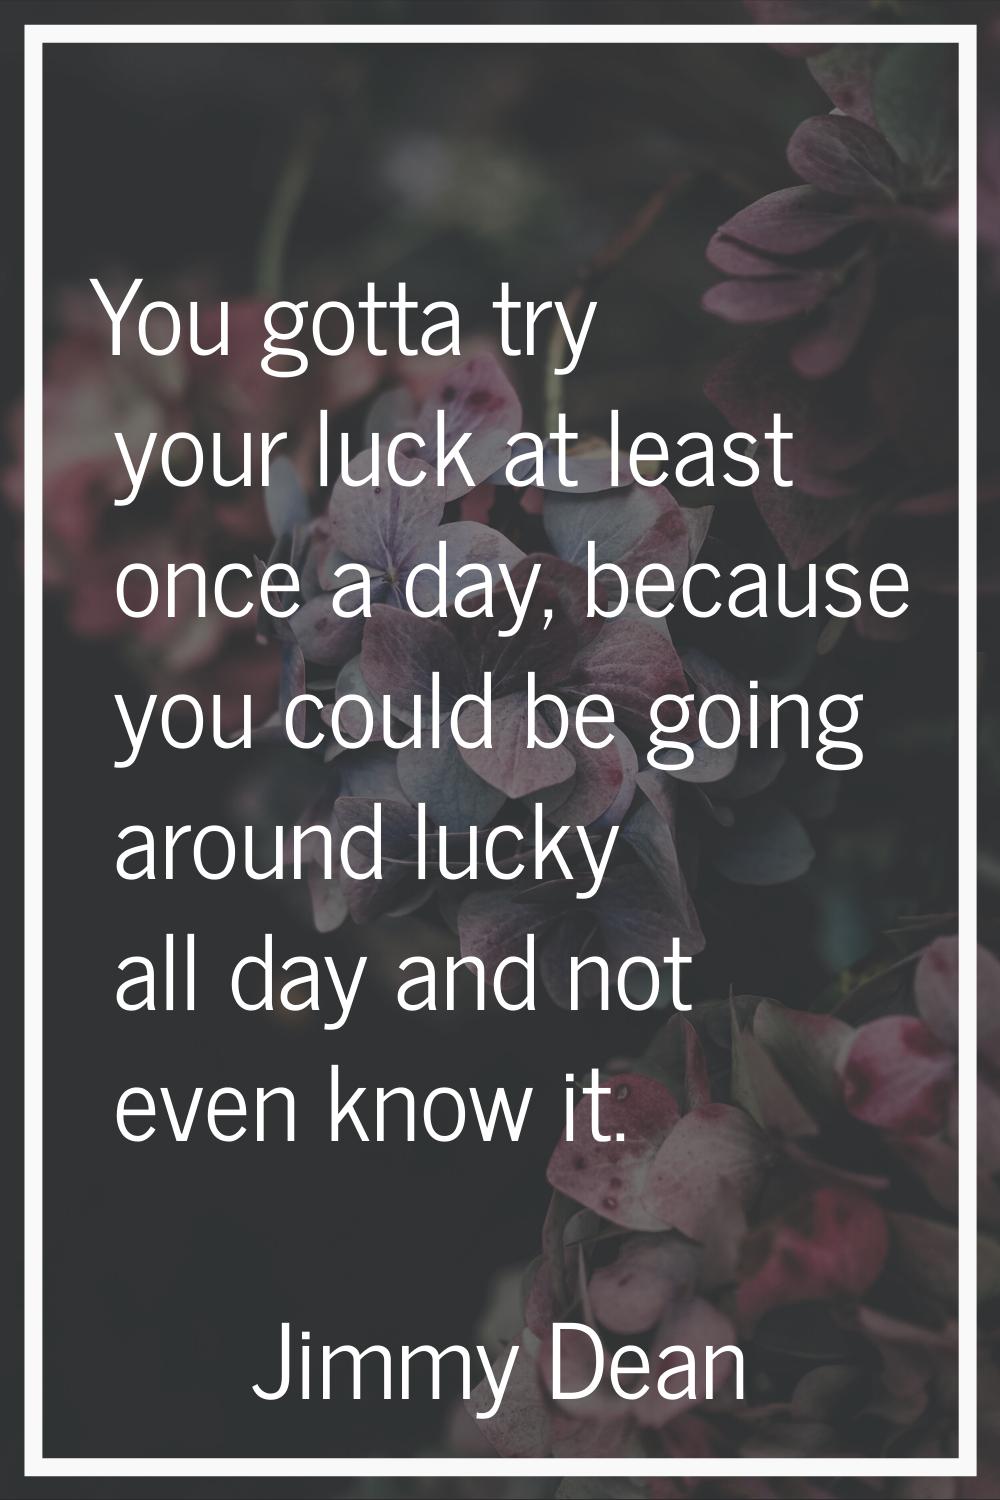 You gotta try your luck at least once a day, because you could be going around lucky all day and no